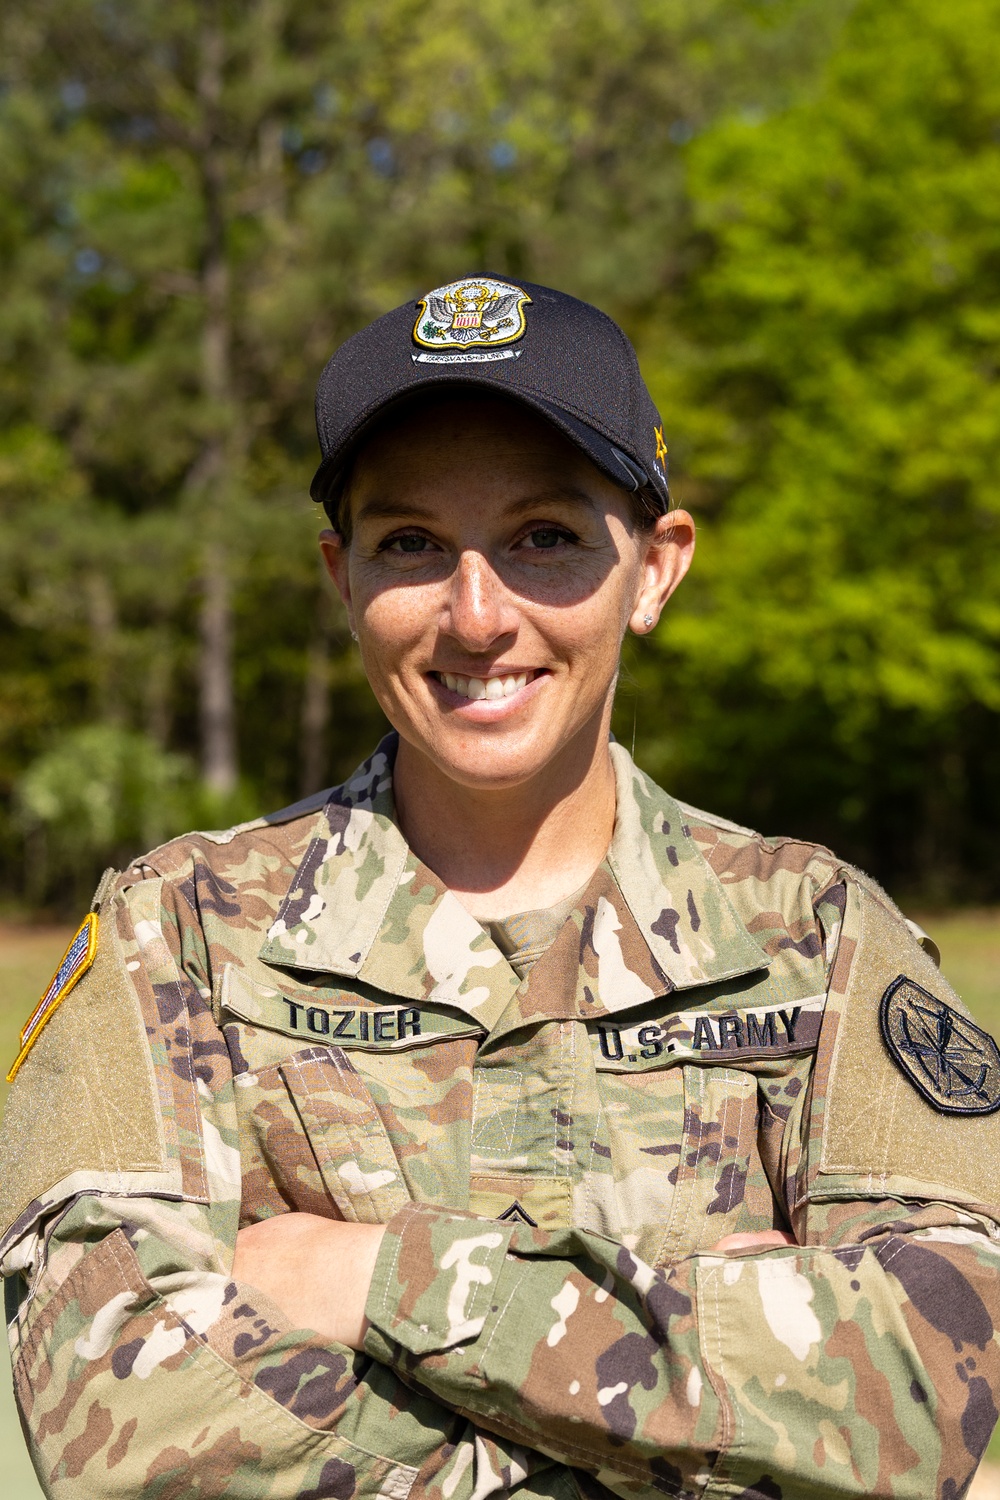 Meet Rachel Tozier: U.S. Army Soldier and 2024 Olympian